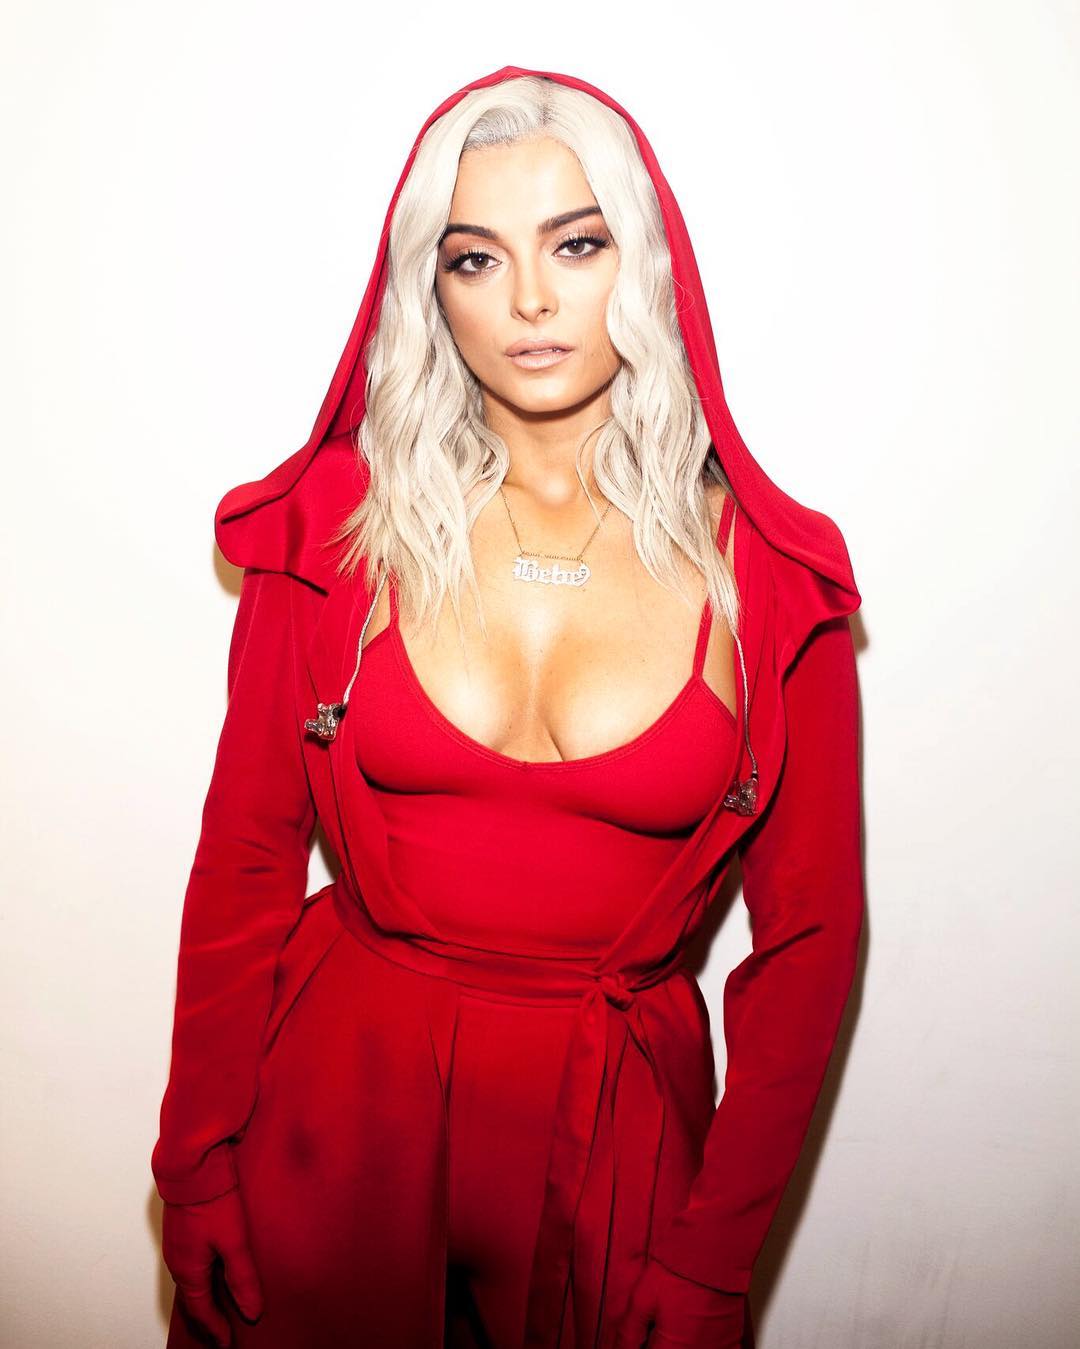 47 Hottest Bebe Rexha Bikini Pictures Reveal Her Curvy Butt | Best Of Comic Books